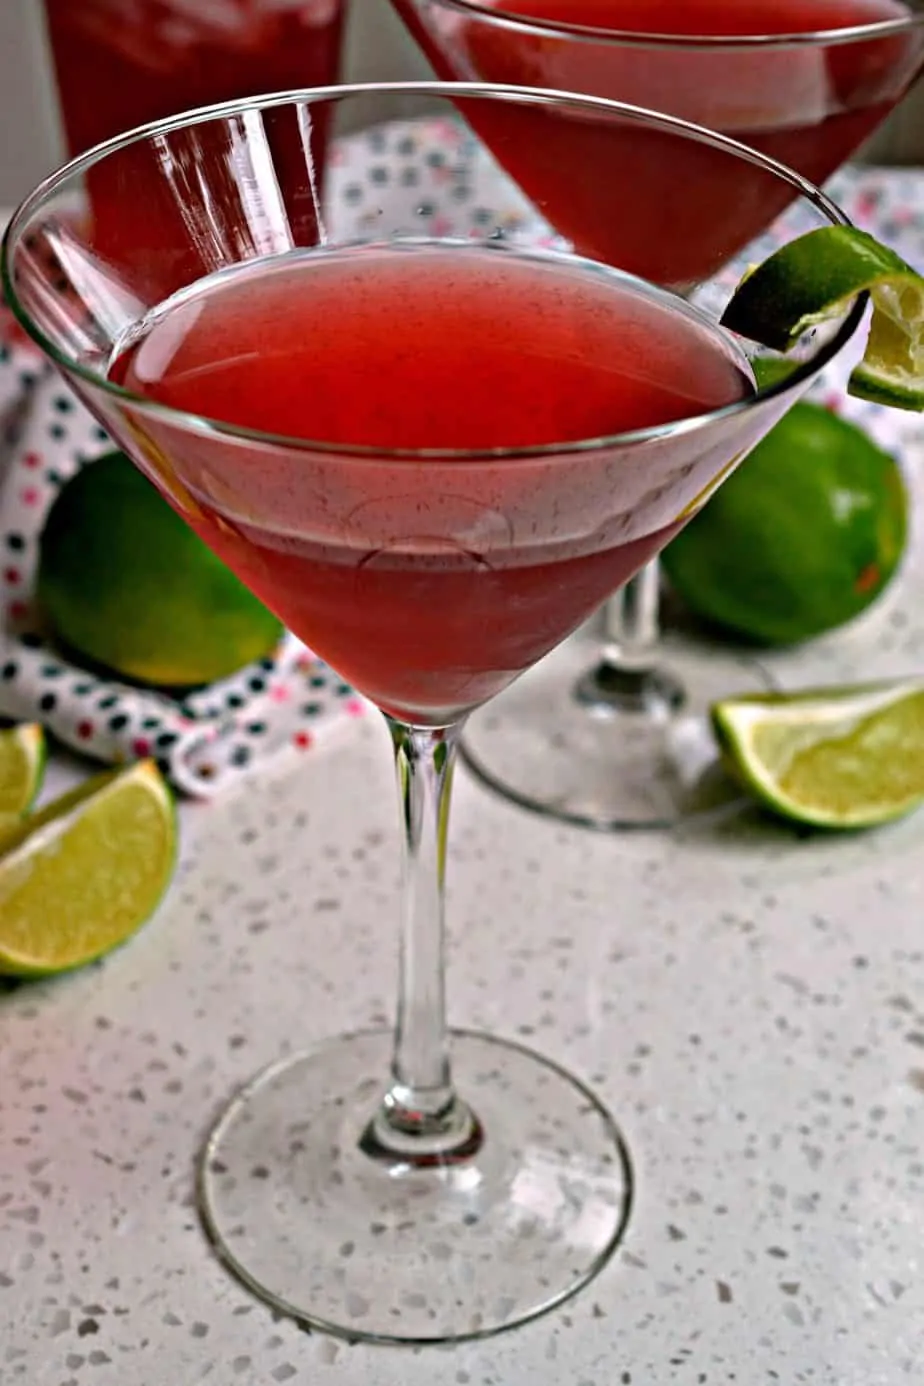 With just a handful of ingredients you too can partake of this delectable Cosmopolitan Drink.